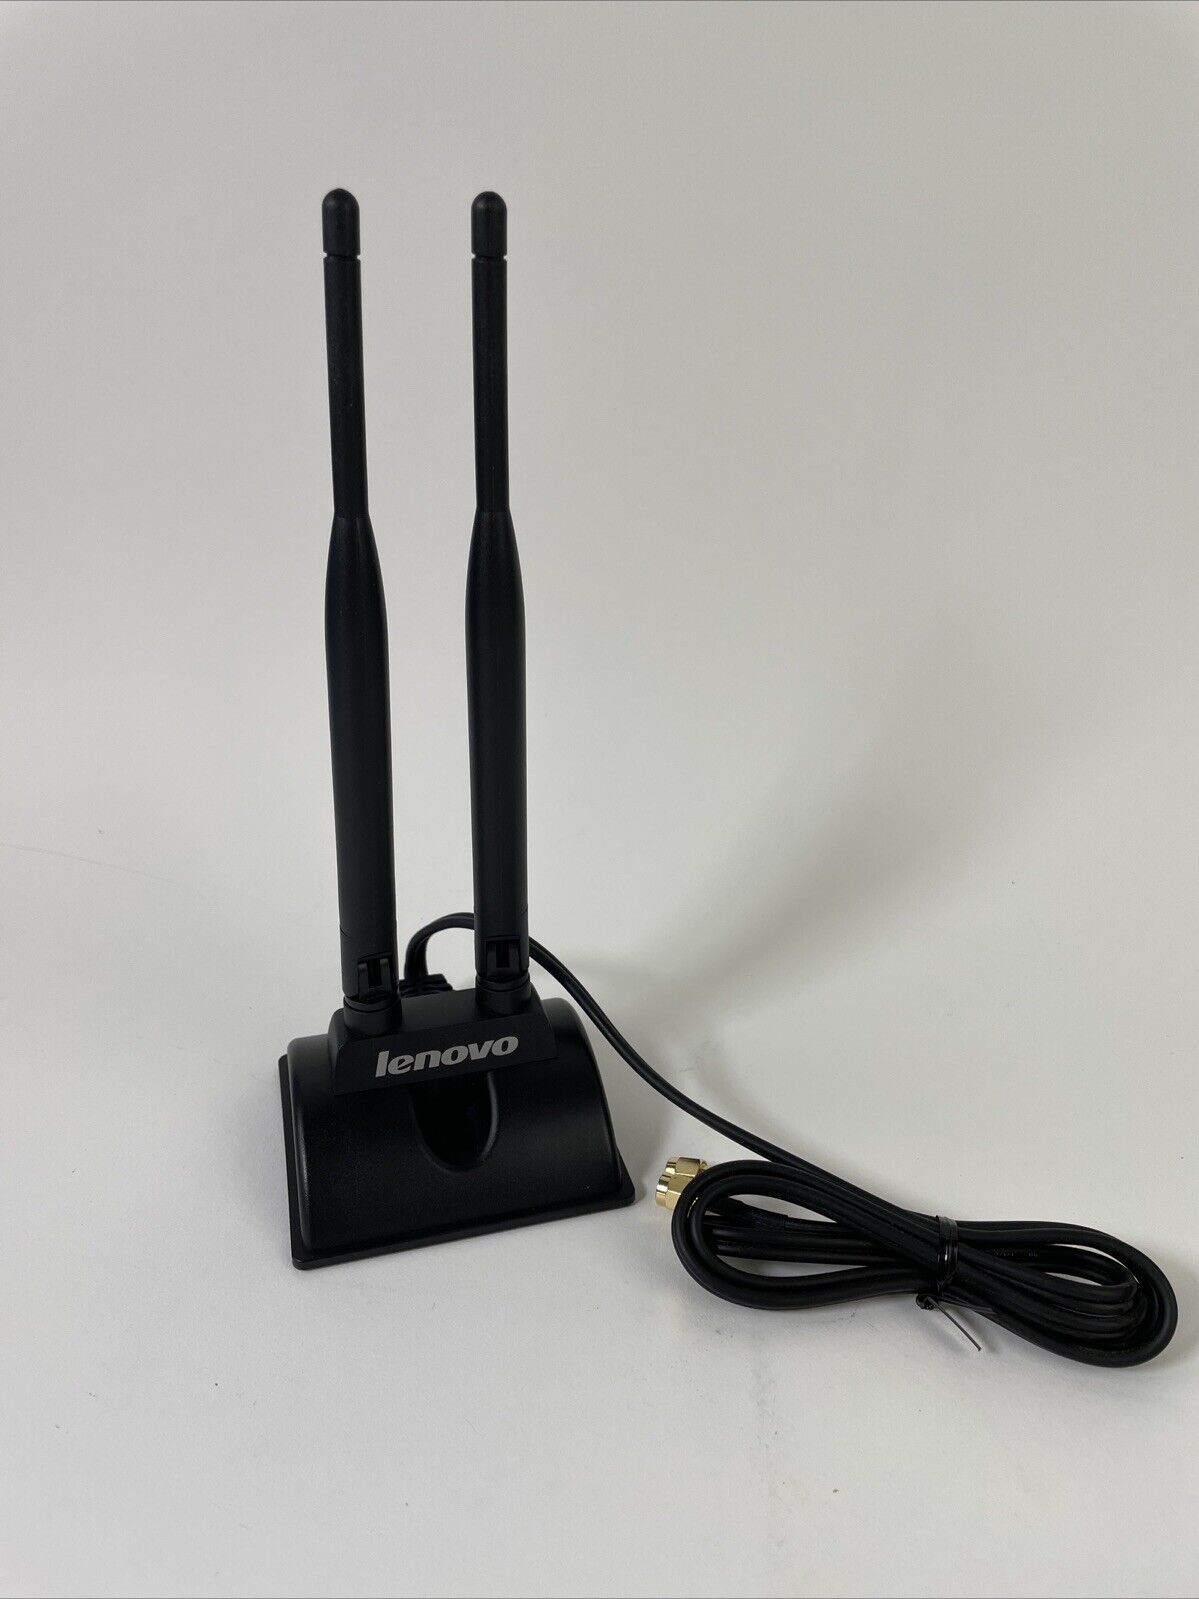 Lenovo 2.4G 5.8G WIFI Antenna Dual Band Magnetic Base for Wireless Router